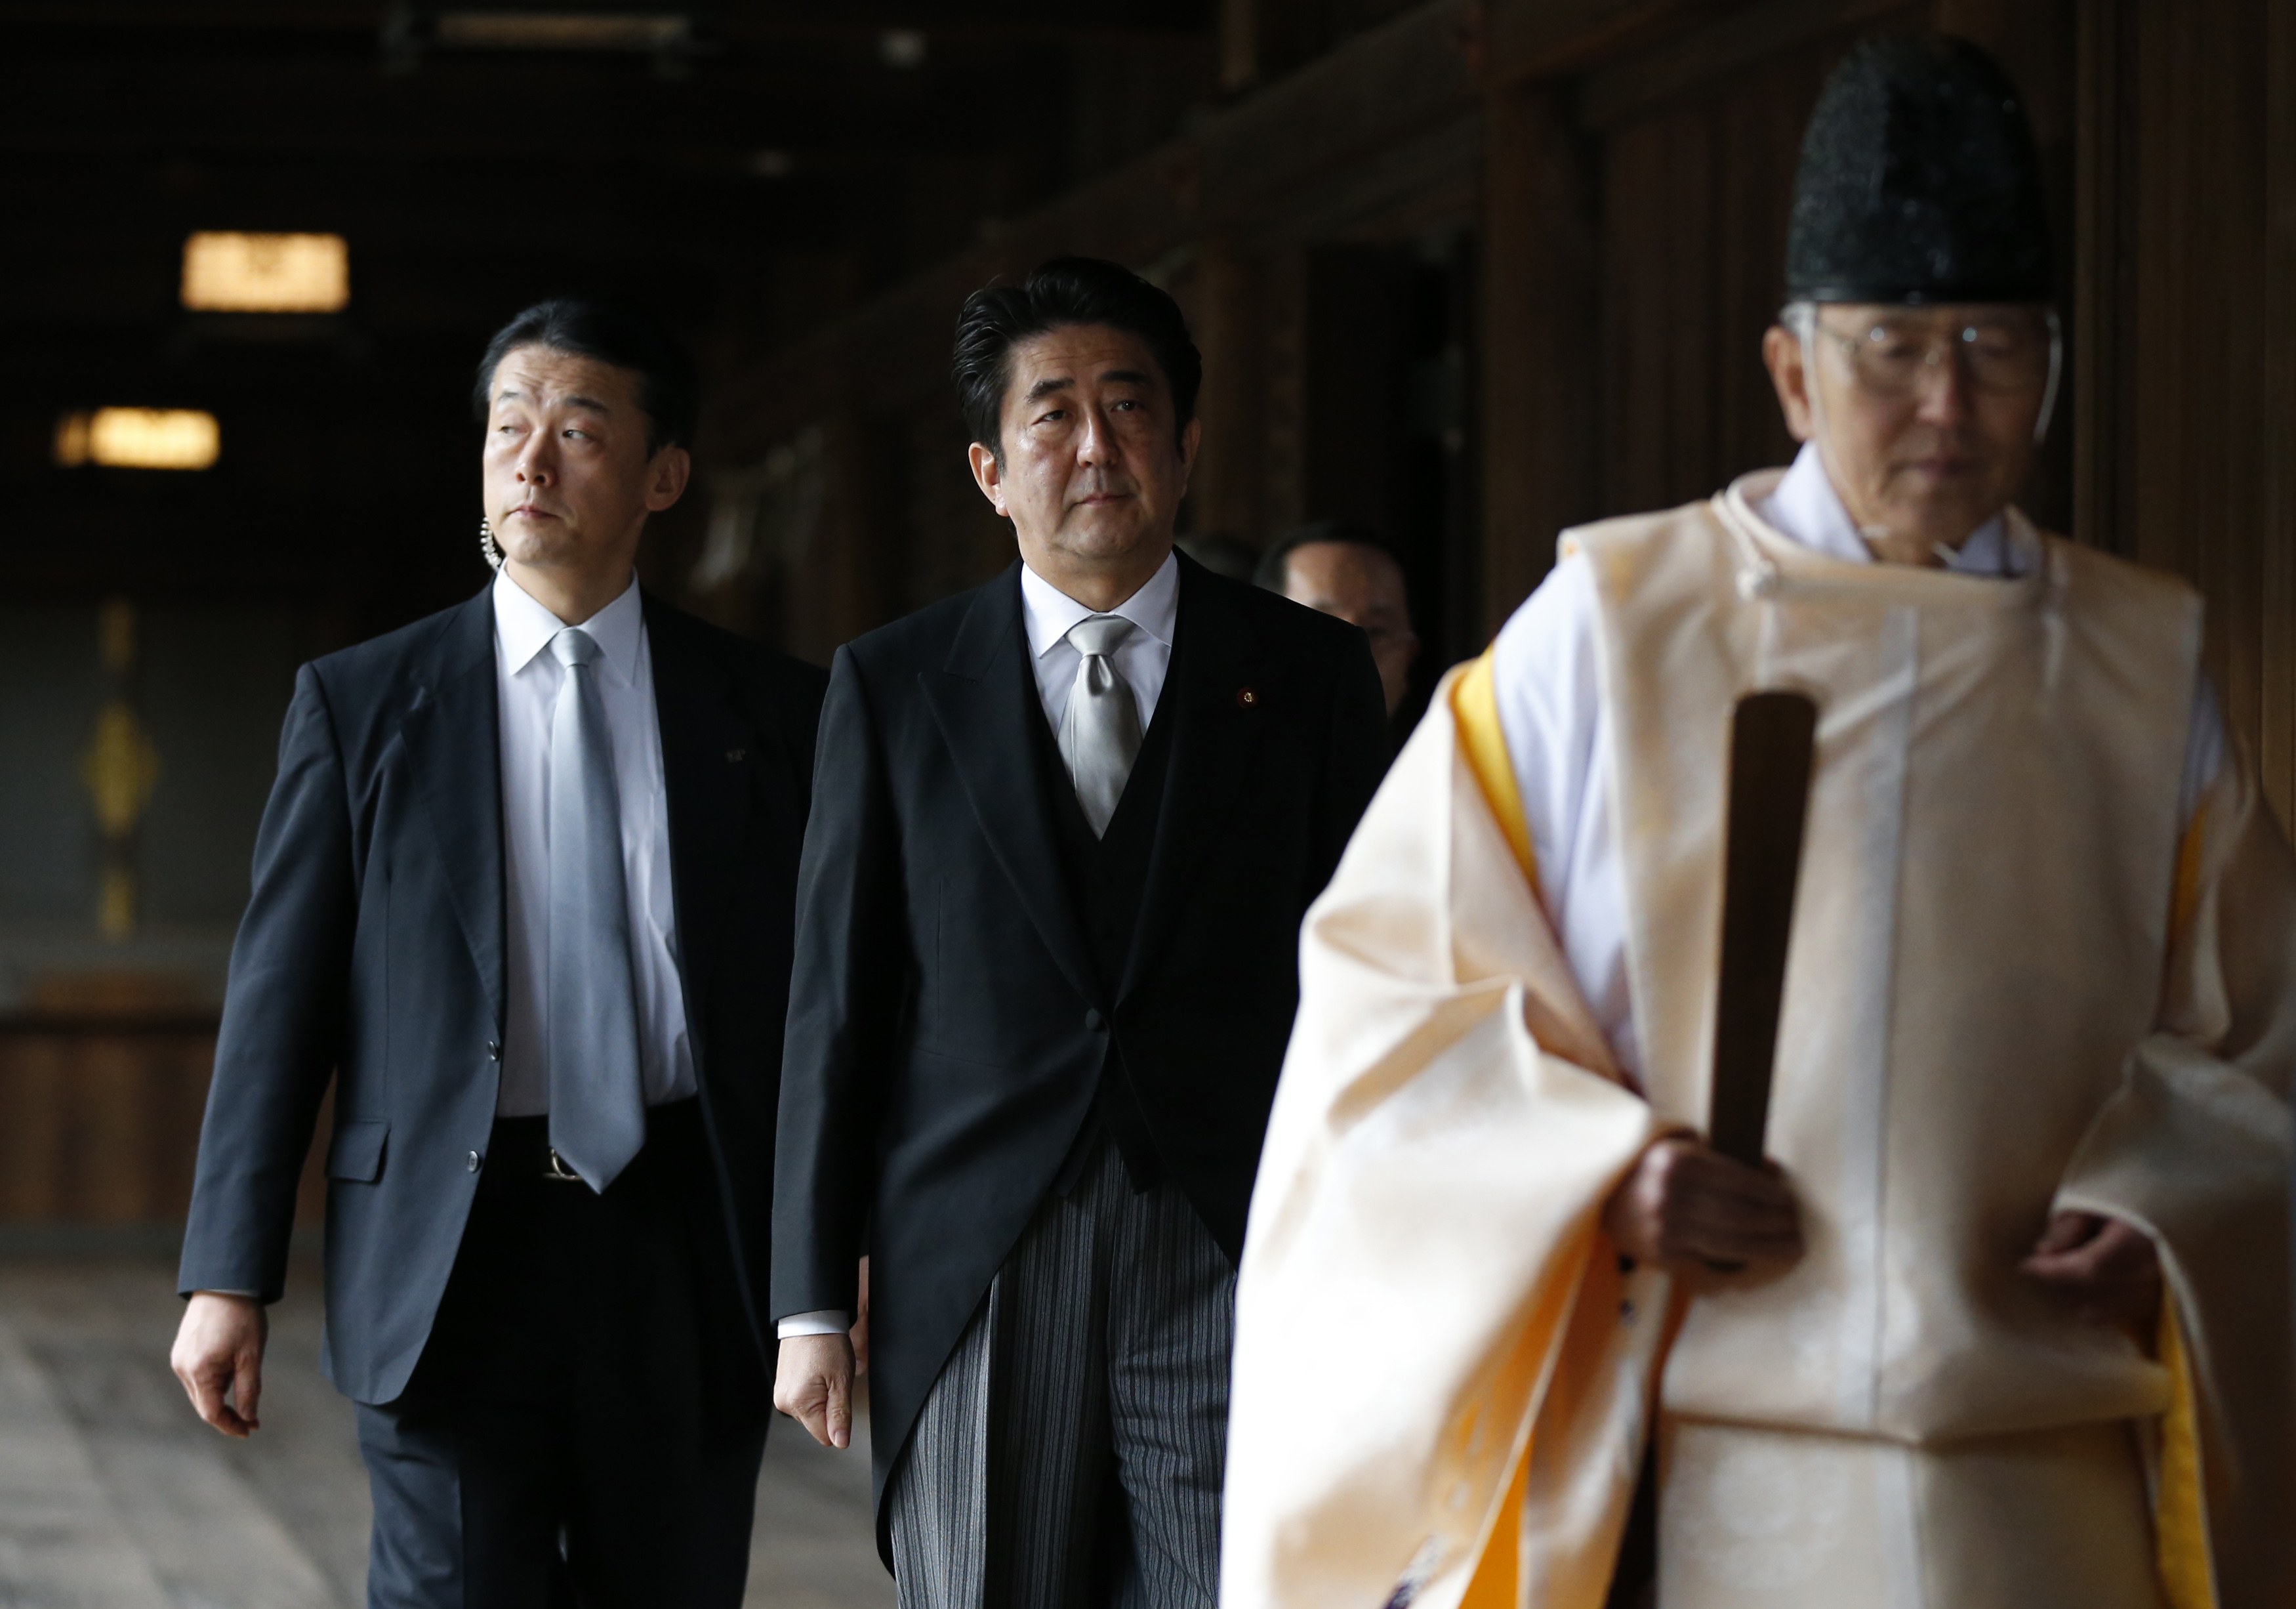 Prime Minister Shinzo Abe has been criticised for visiting the Yasukuni shrine in Tokyo, which honours Japan's war dead, including 14 convicted war criminals. Photo: Reuters